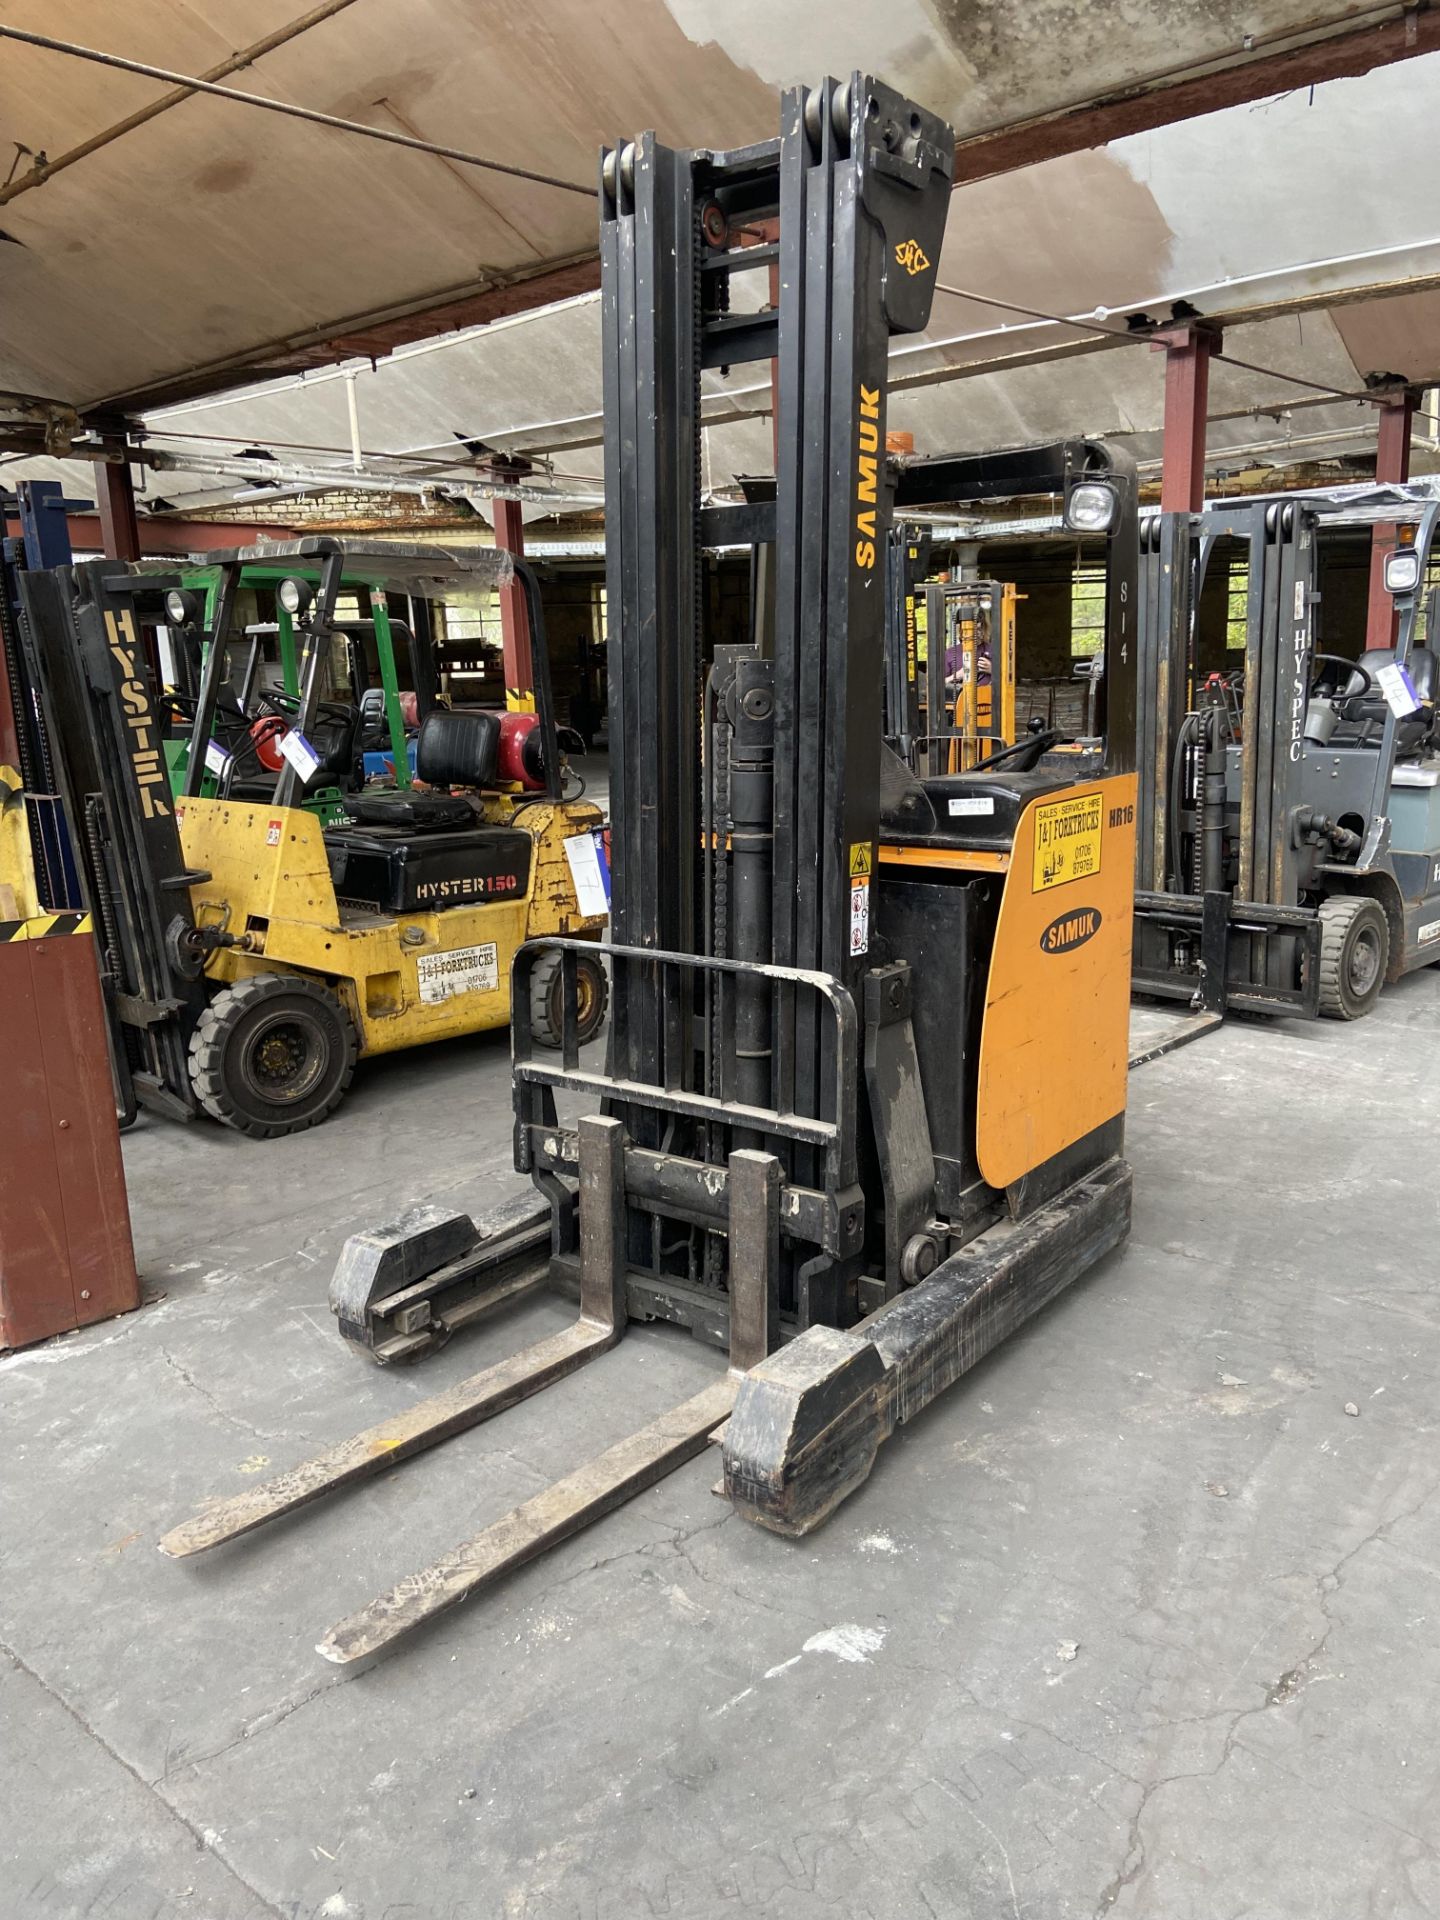 Samuk HR16 1600kg cap. Electric Reach Truck, serial no. 061226938, indicated hours 3356.9 (at time